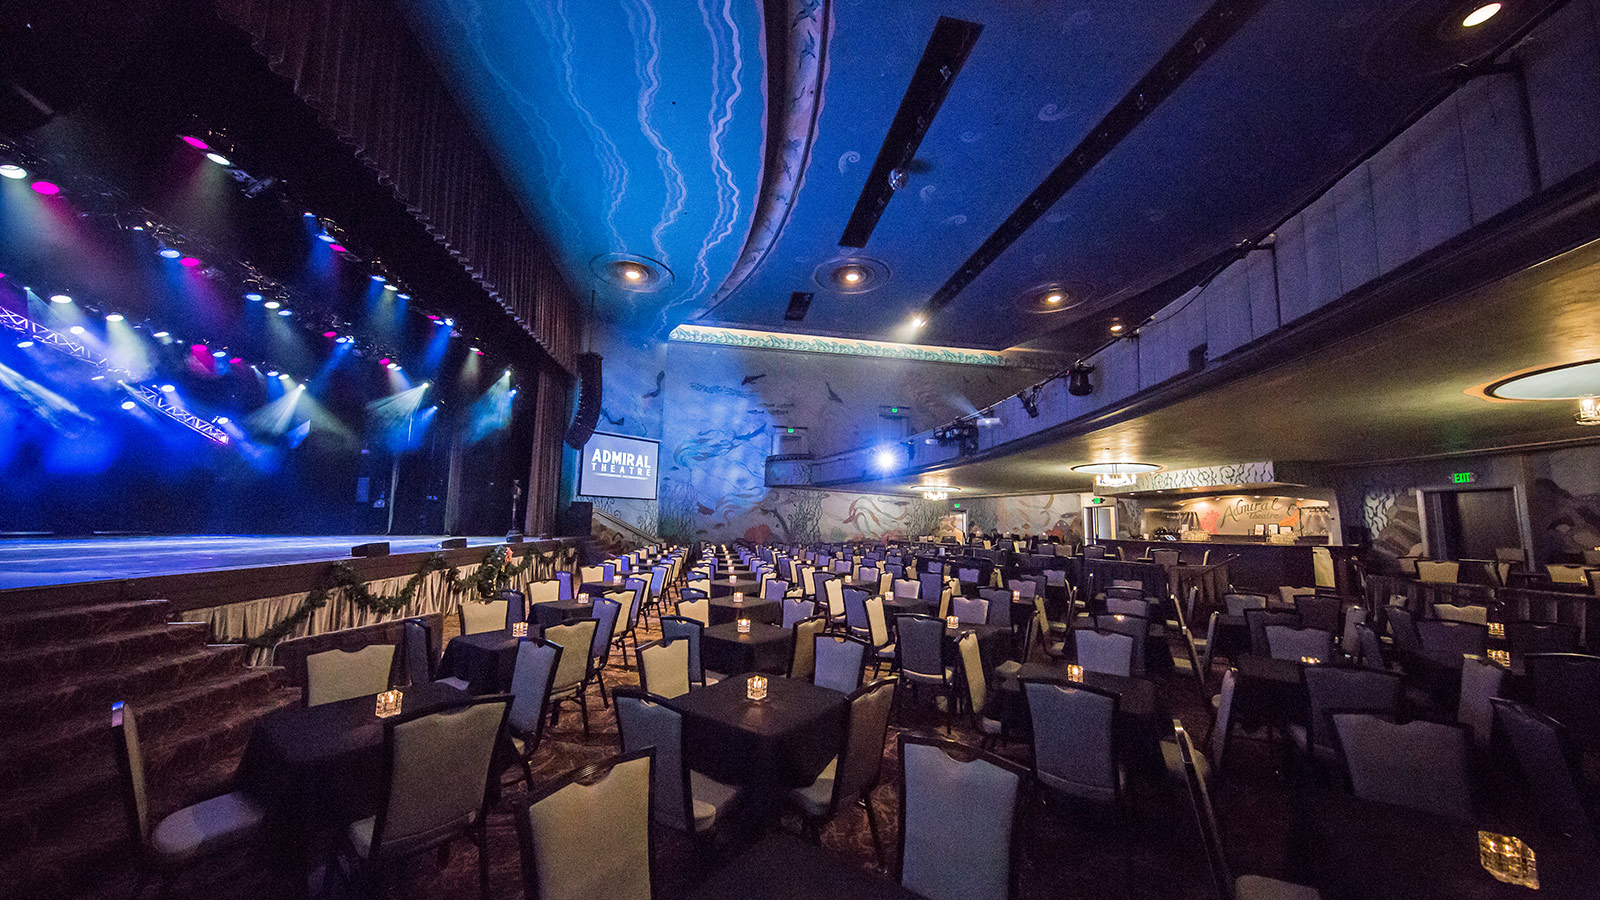 Admiral Theatre Cruises into the Future with Meyer Sound LEOPARD Main Reinforcement System